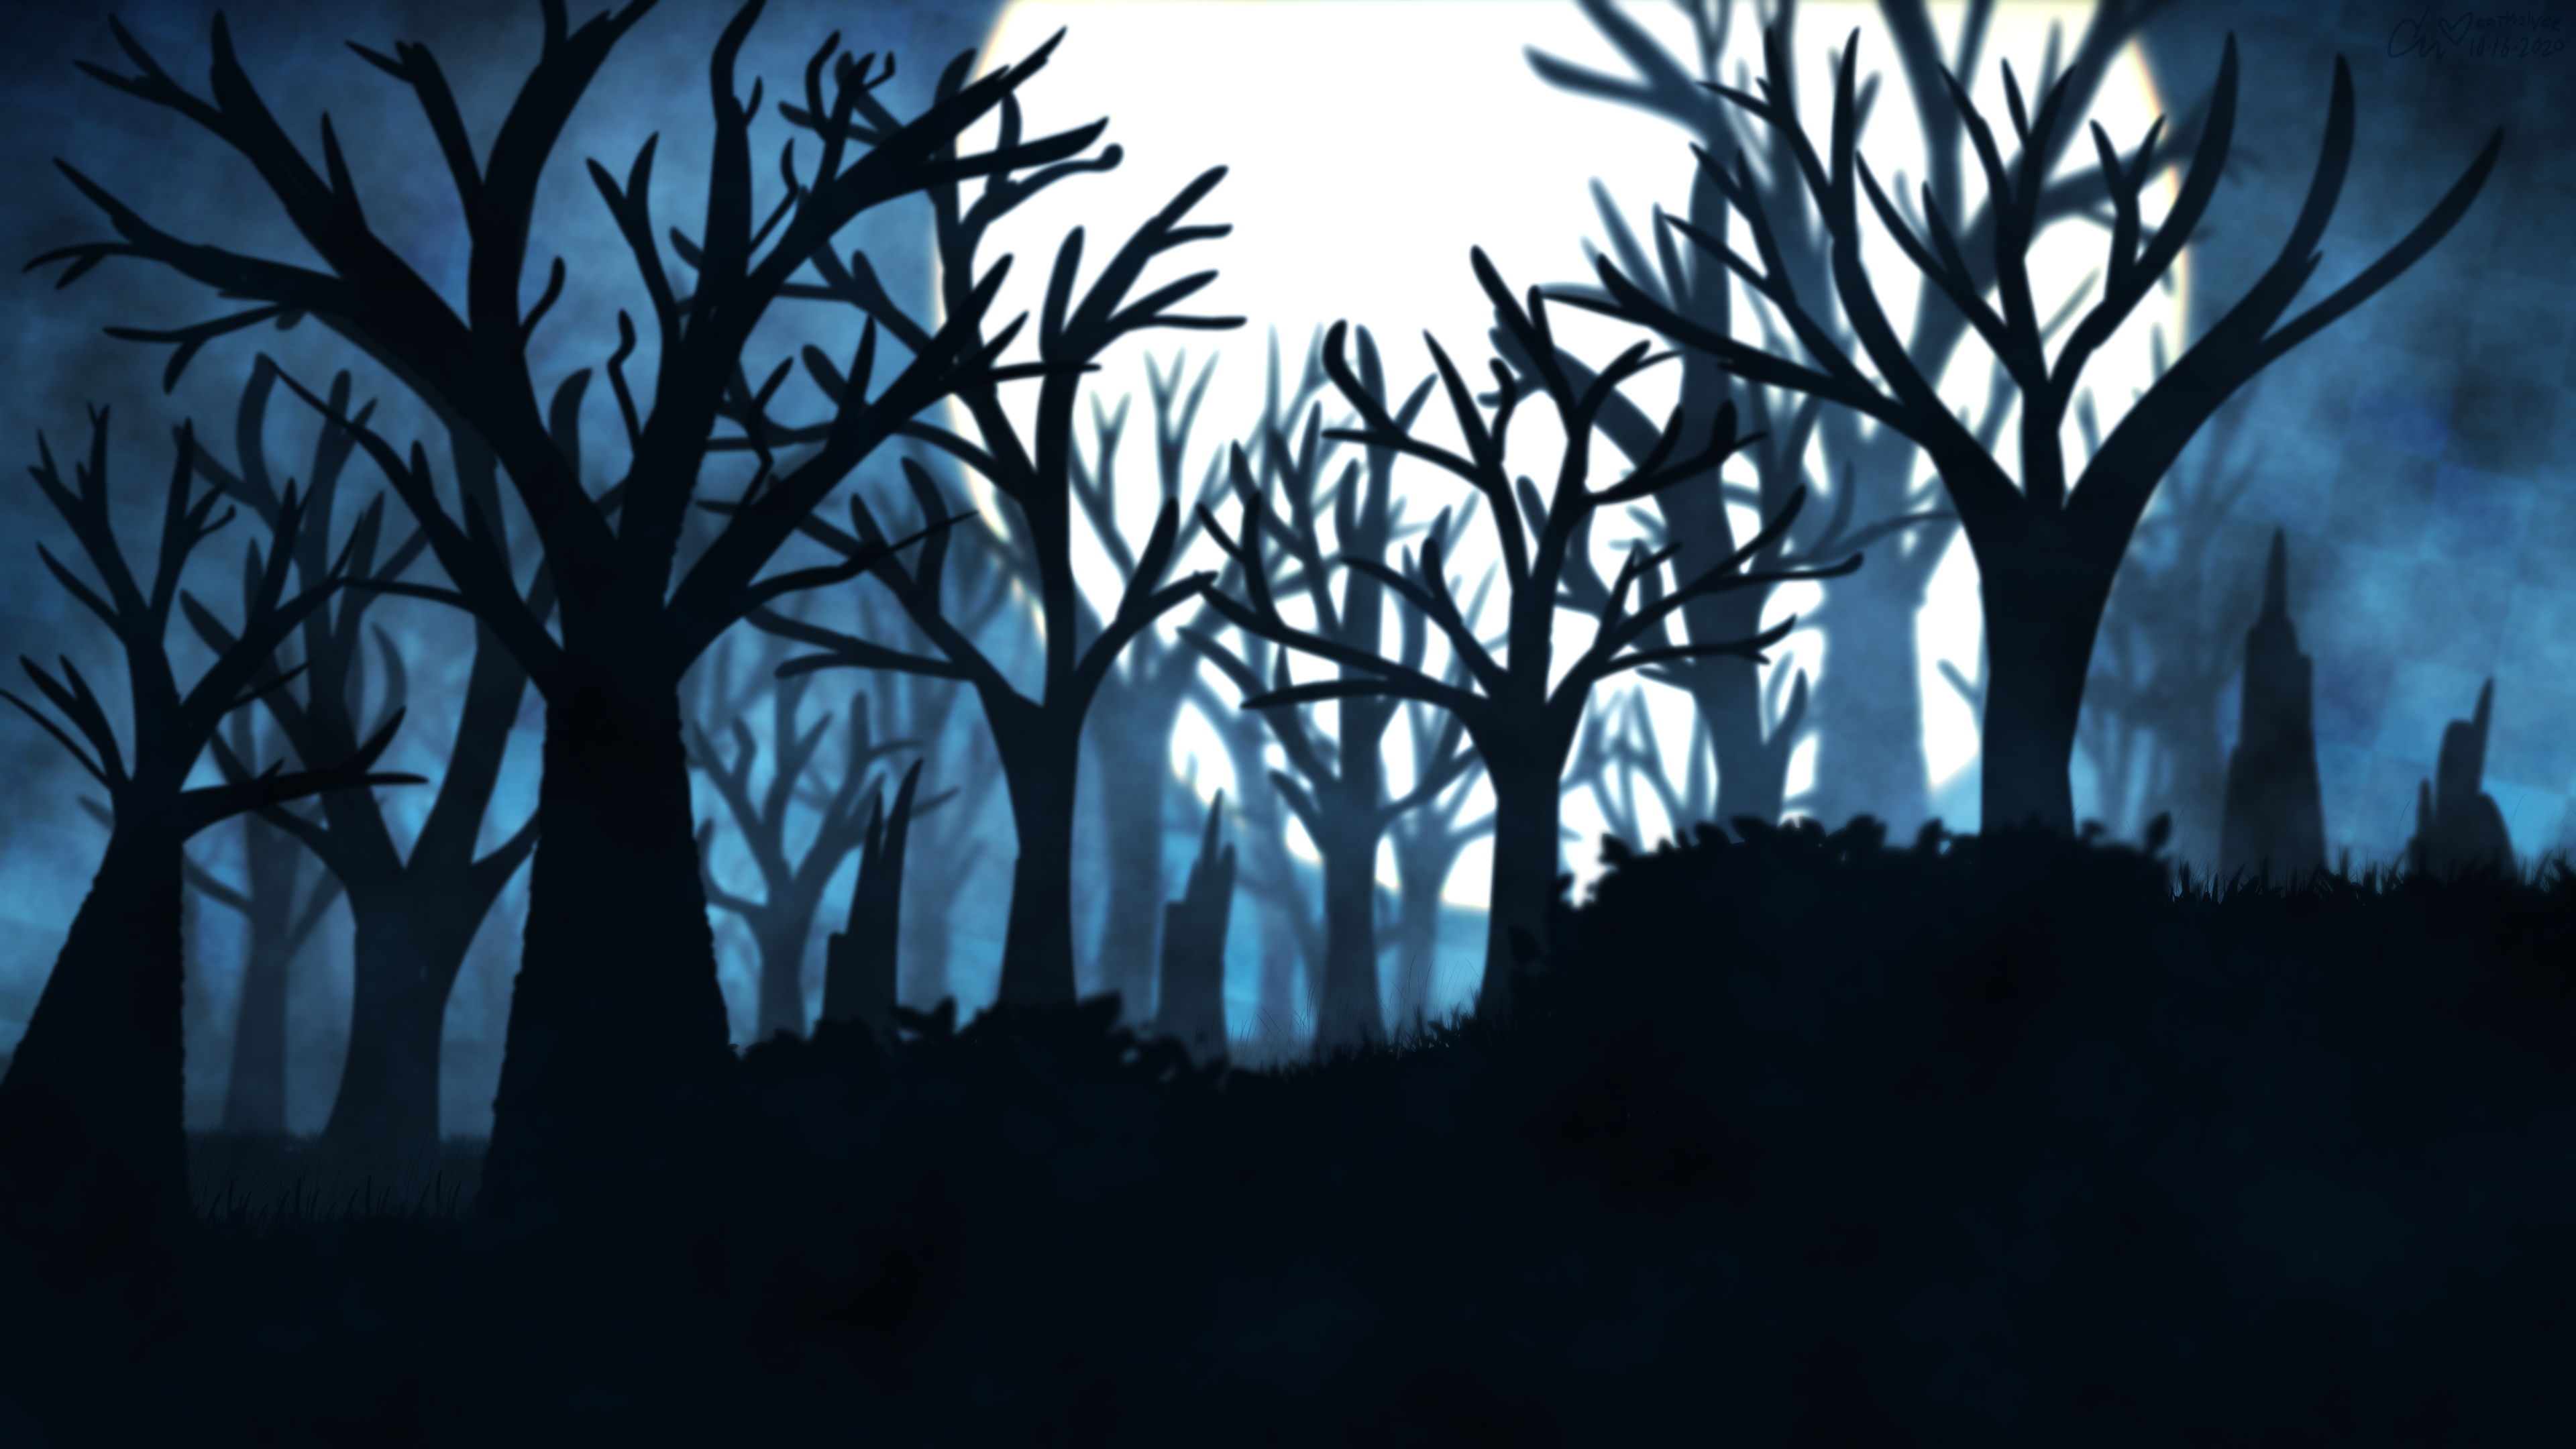 Foggy Forest Wallpaper by CaikSlyce on DeviantArt